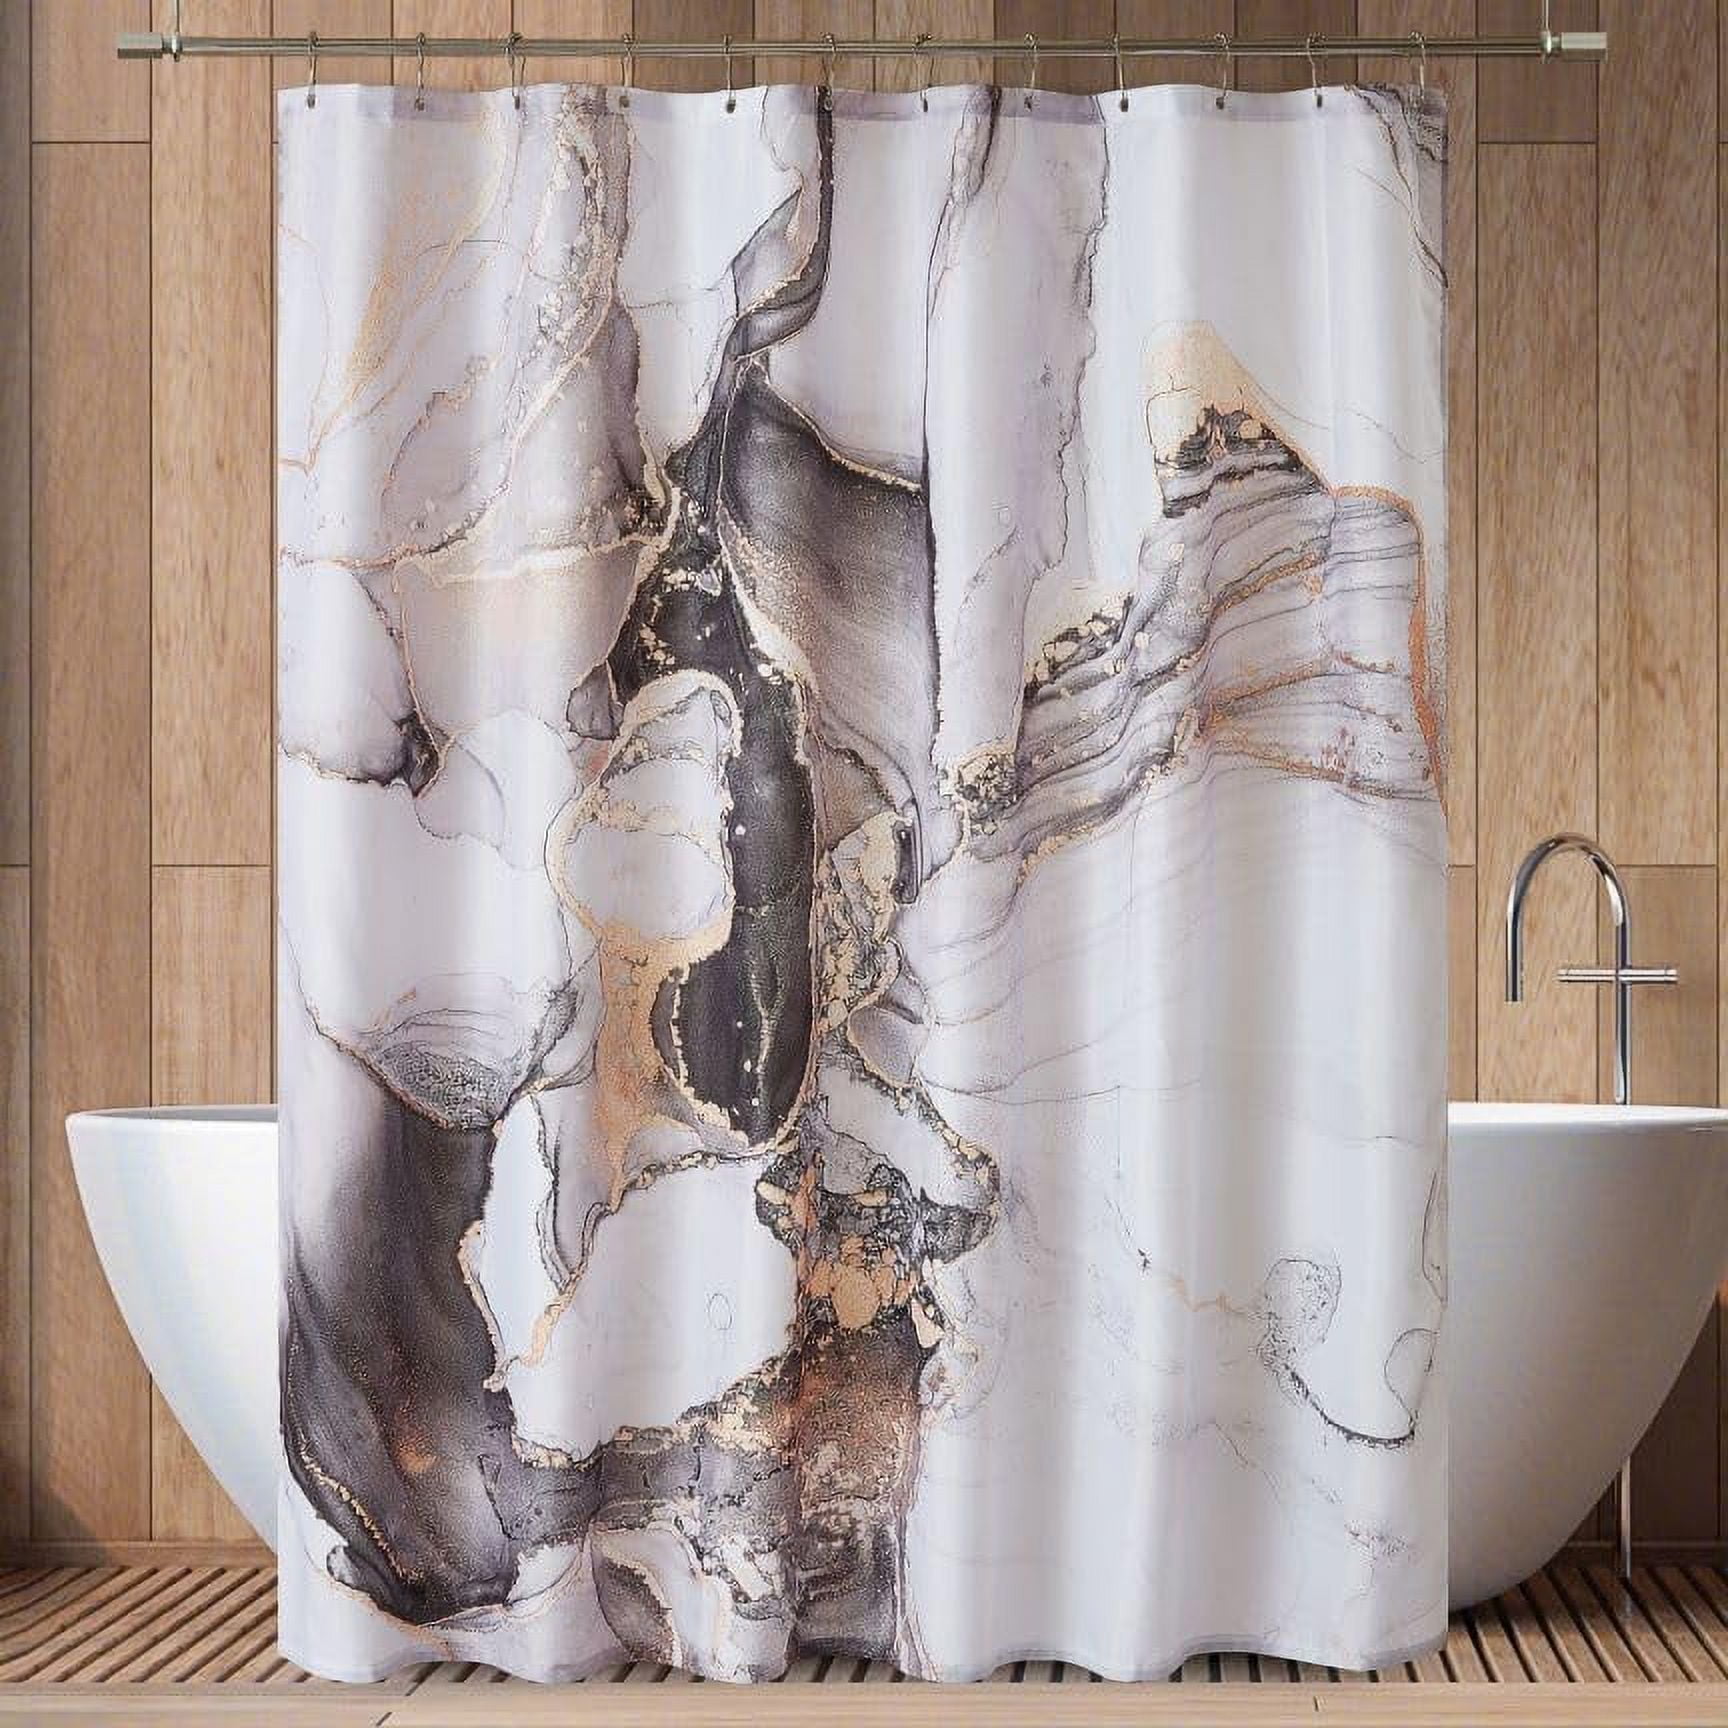 Blue Gold Marble Shower Curtain Set Abstract Granite Pattern Curtains For Bathroom Décor Luxury Modern Waterproof Bath Accessories With 9 Metal Hooks 54x78 Inch Com